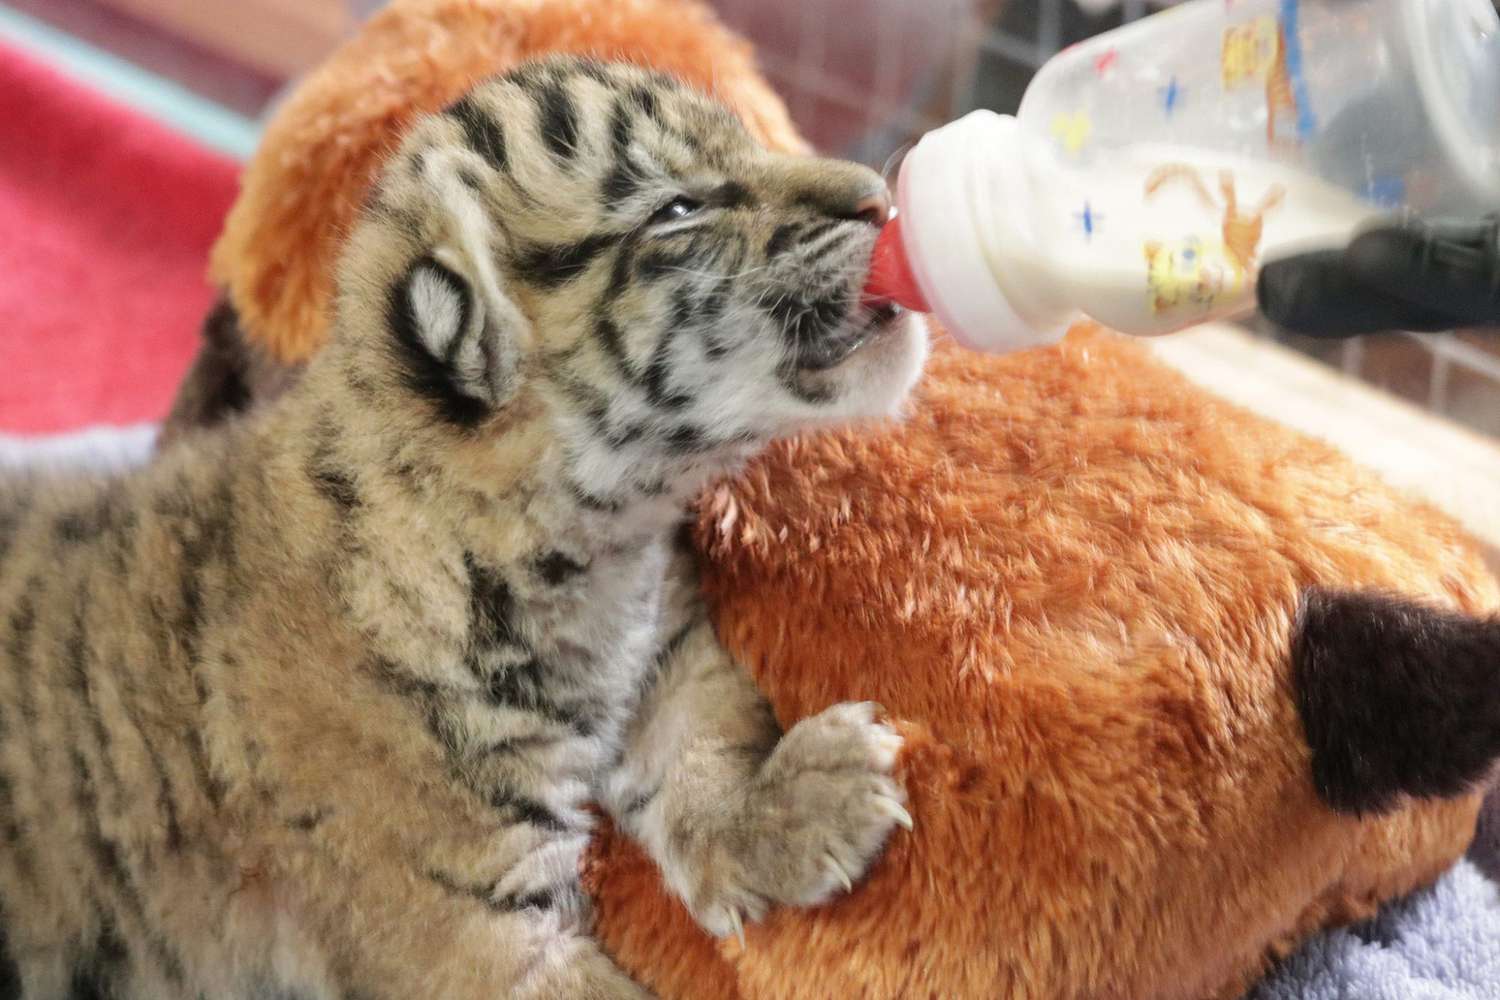 Dallas Zoo Announces Birth of First Tiger Cub in 70 Years